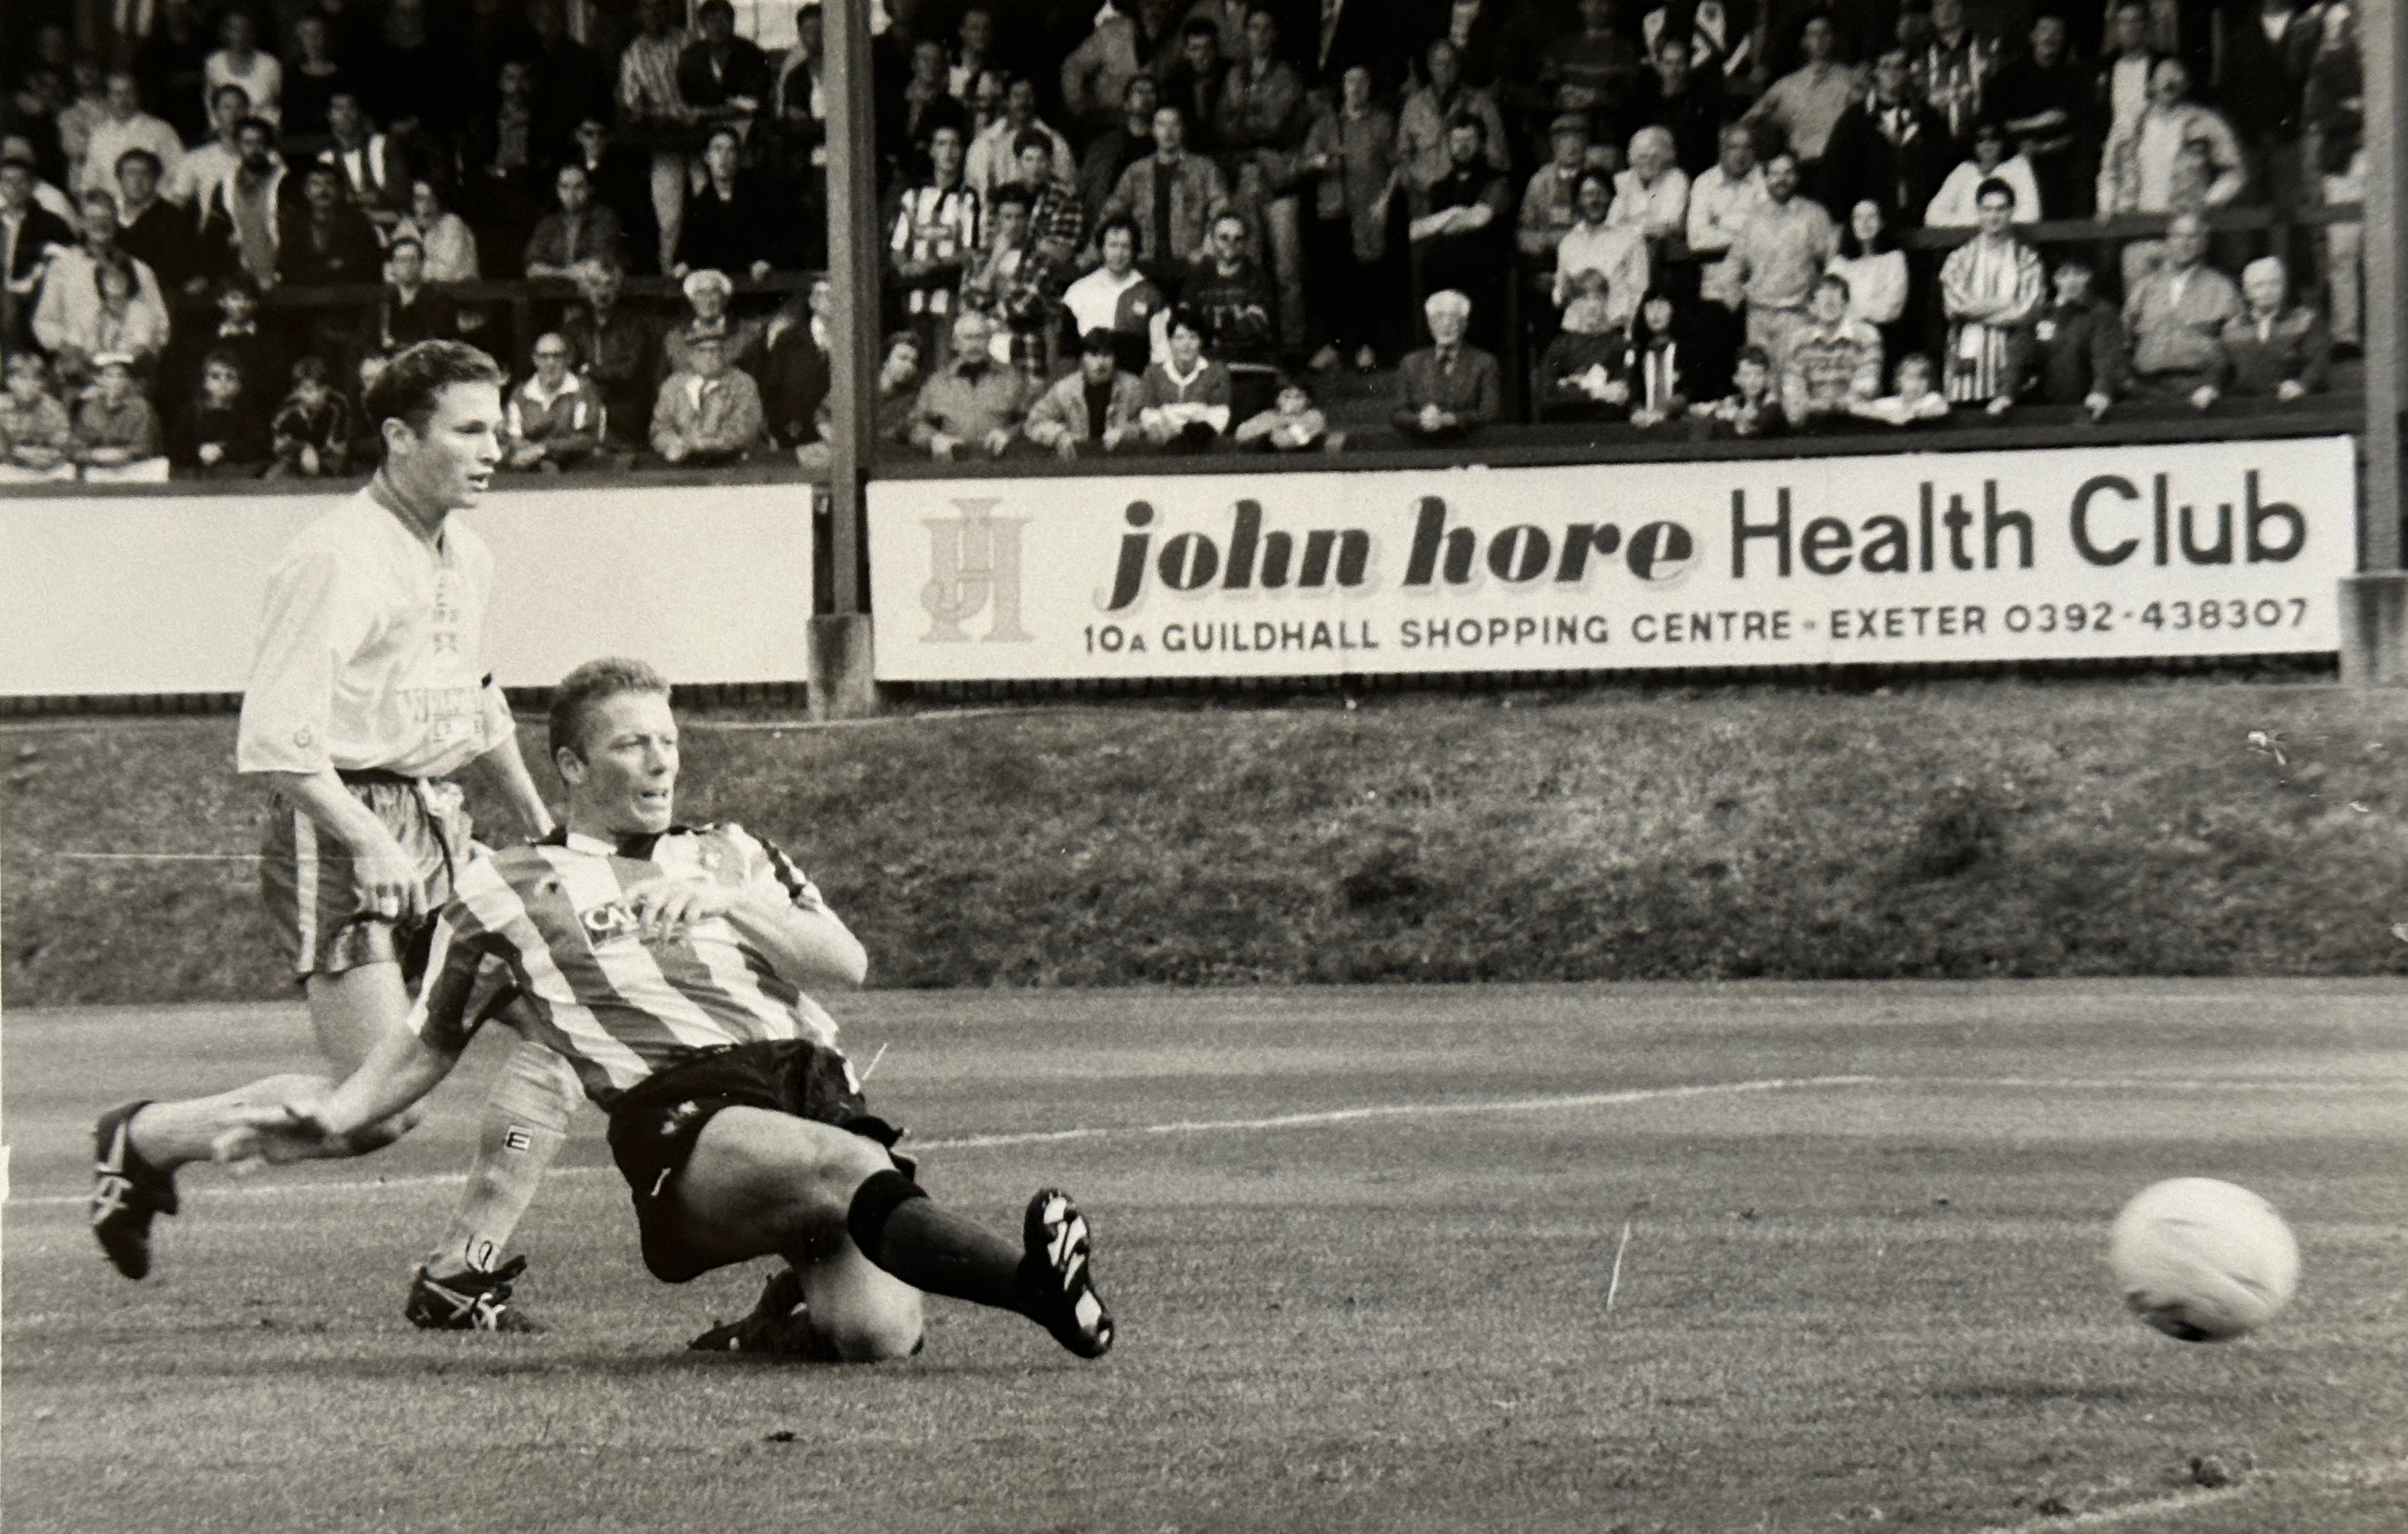 Ronnie Jepson scoring for Exeter against Wrexham in 1993. The image is in black and white. 